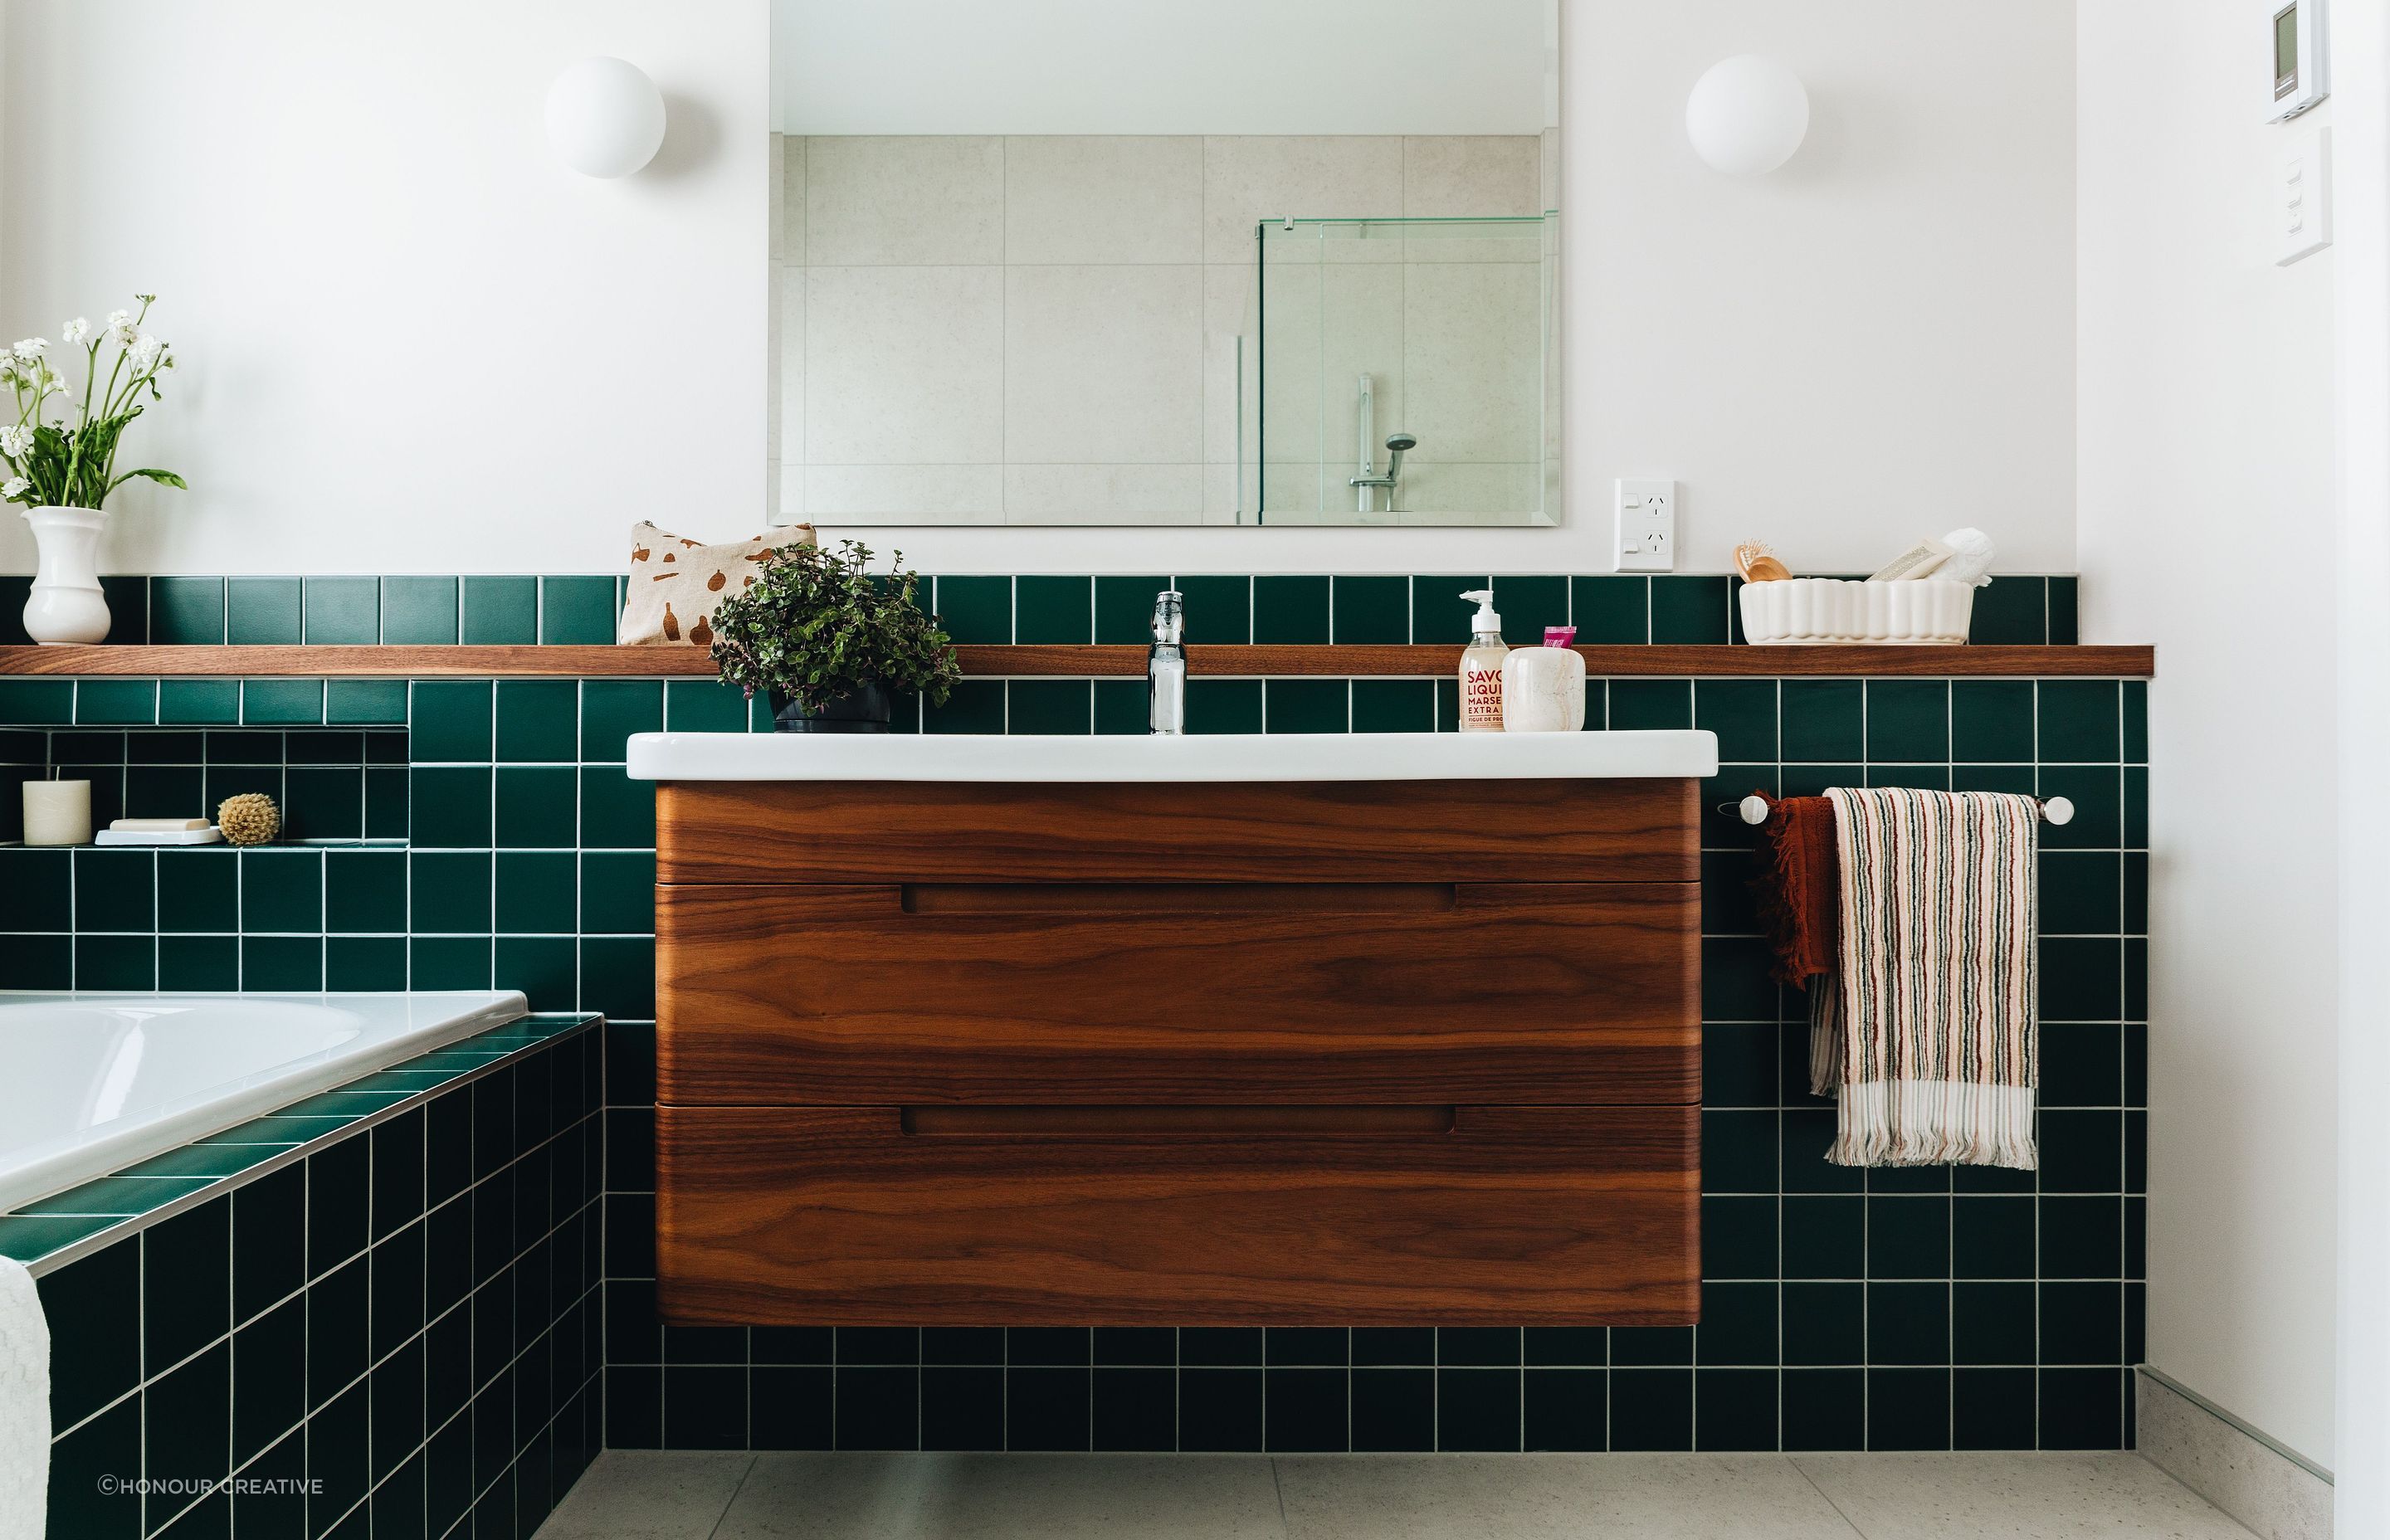 Green is the trendy tile colour of choice flowing from the bathtub and beyond in this Eastbourne residence.